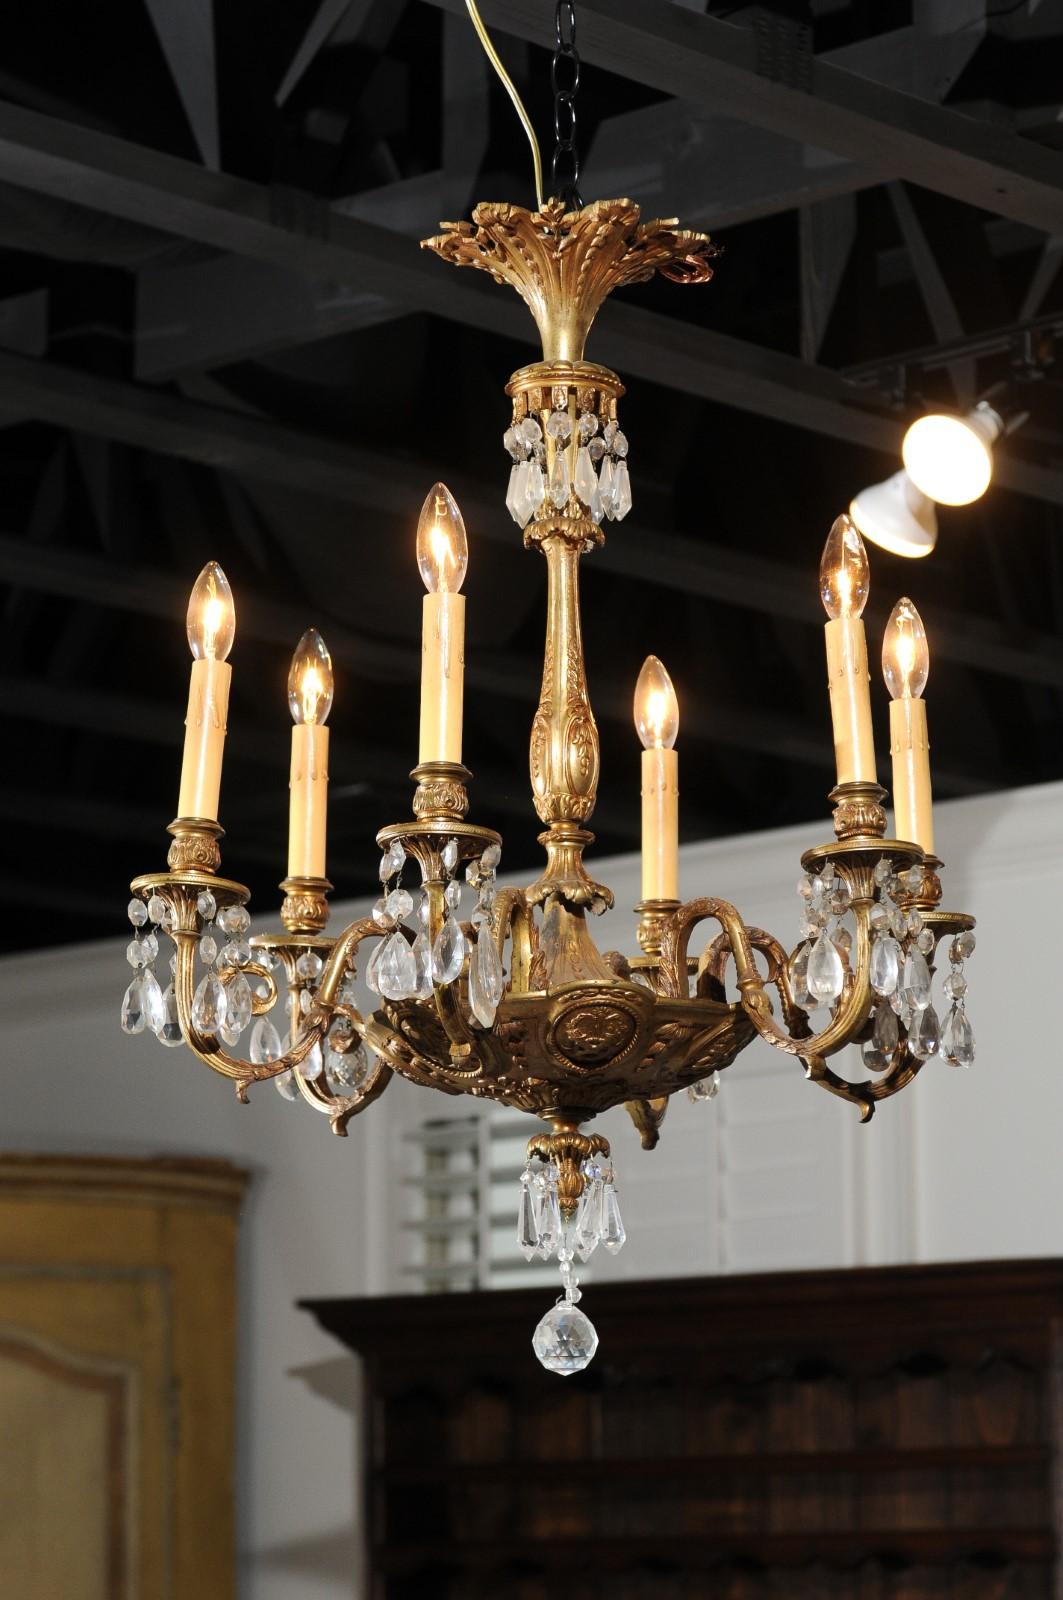 A French Louis XVI style bronze and crystal six-light chandelier from the 19th century, with foliage and medallion motifs. Born in France during the 19th century, this exquisite bronze chandelier features a central column adorned with foliage